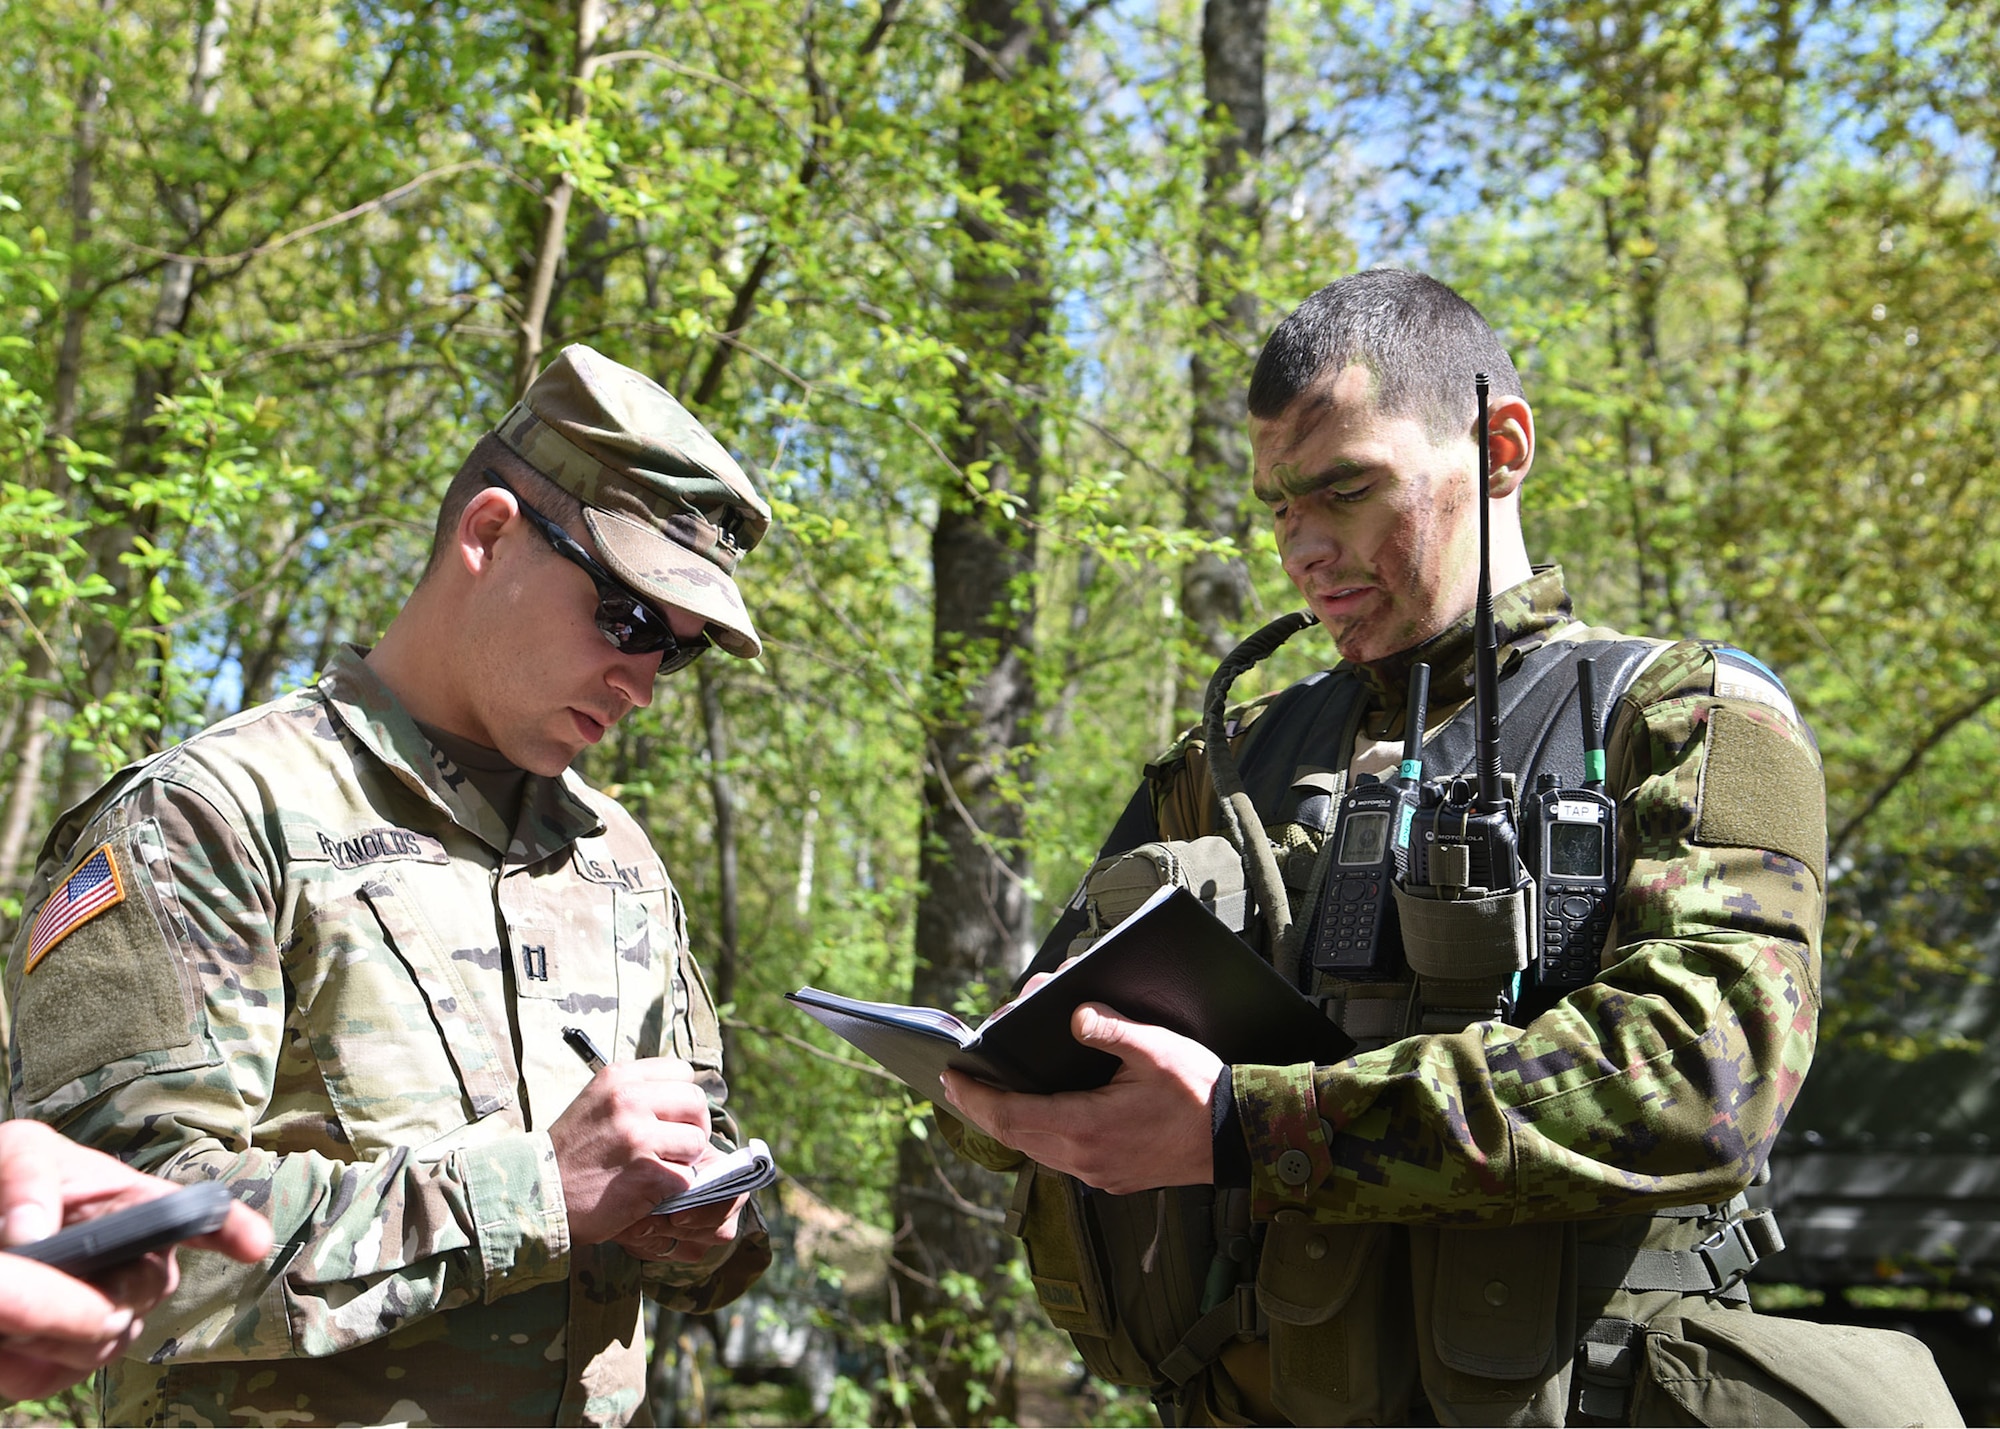 Army Capt. Timothy Reynolds, commander of the 290th Military Police Company, Maryland National Guard, speaks with 1st Lt. Mart Sildnik, company commander of 1st Infantry Brigade military police, Estonian Defense Force, during the Spring Storm exercise, May 6, 2019, in Ida-Viru County, Estonia. Spring Storm is an Estonian Defense Force annual exercise that fosters collaboration between Estonia, the United States, Poland, Britain, Canada and other participating allied nations.